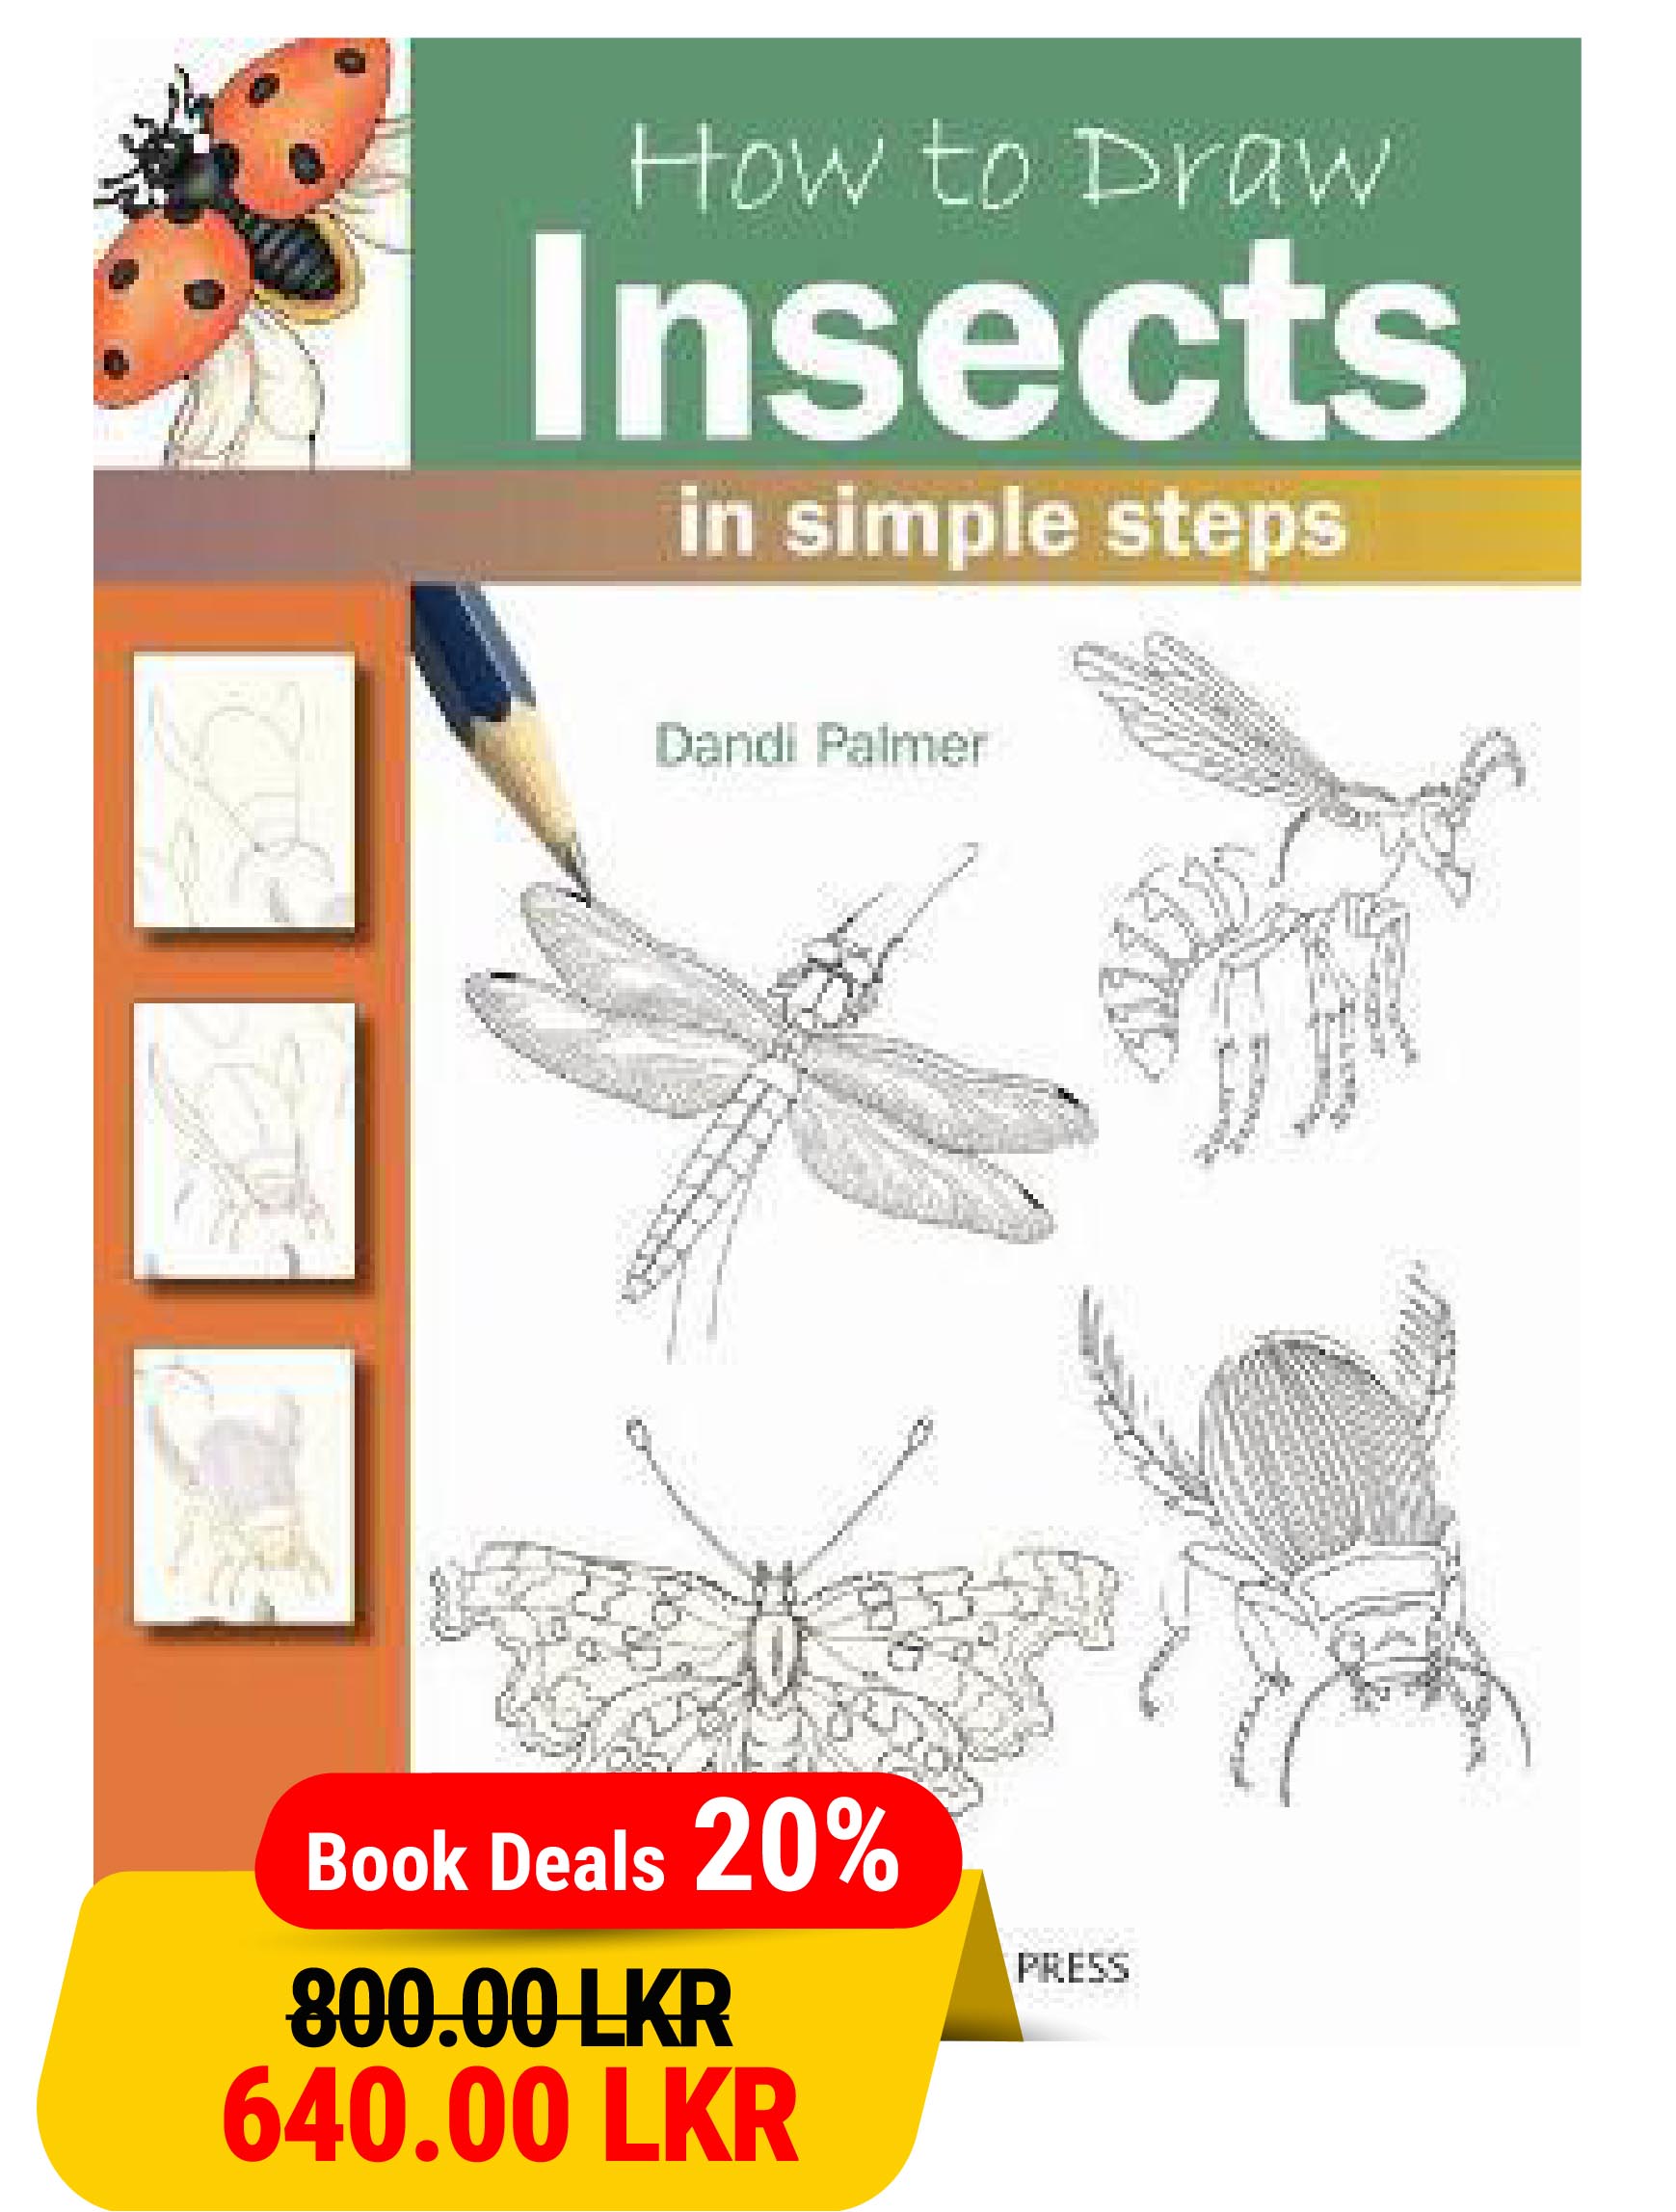 How to Draw Insects in Simple Steps